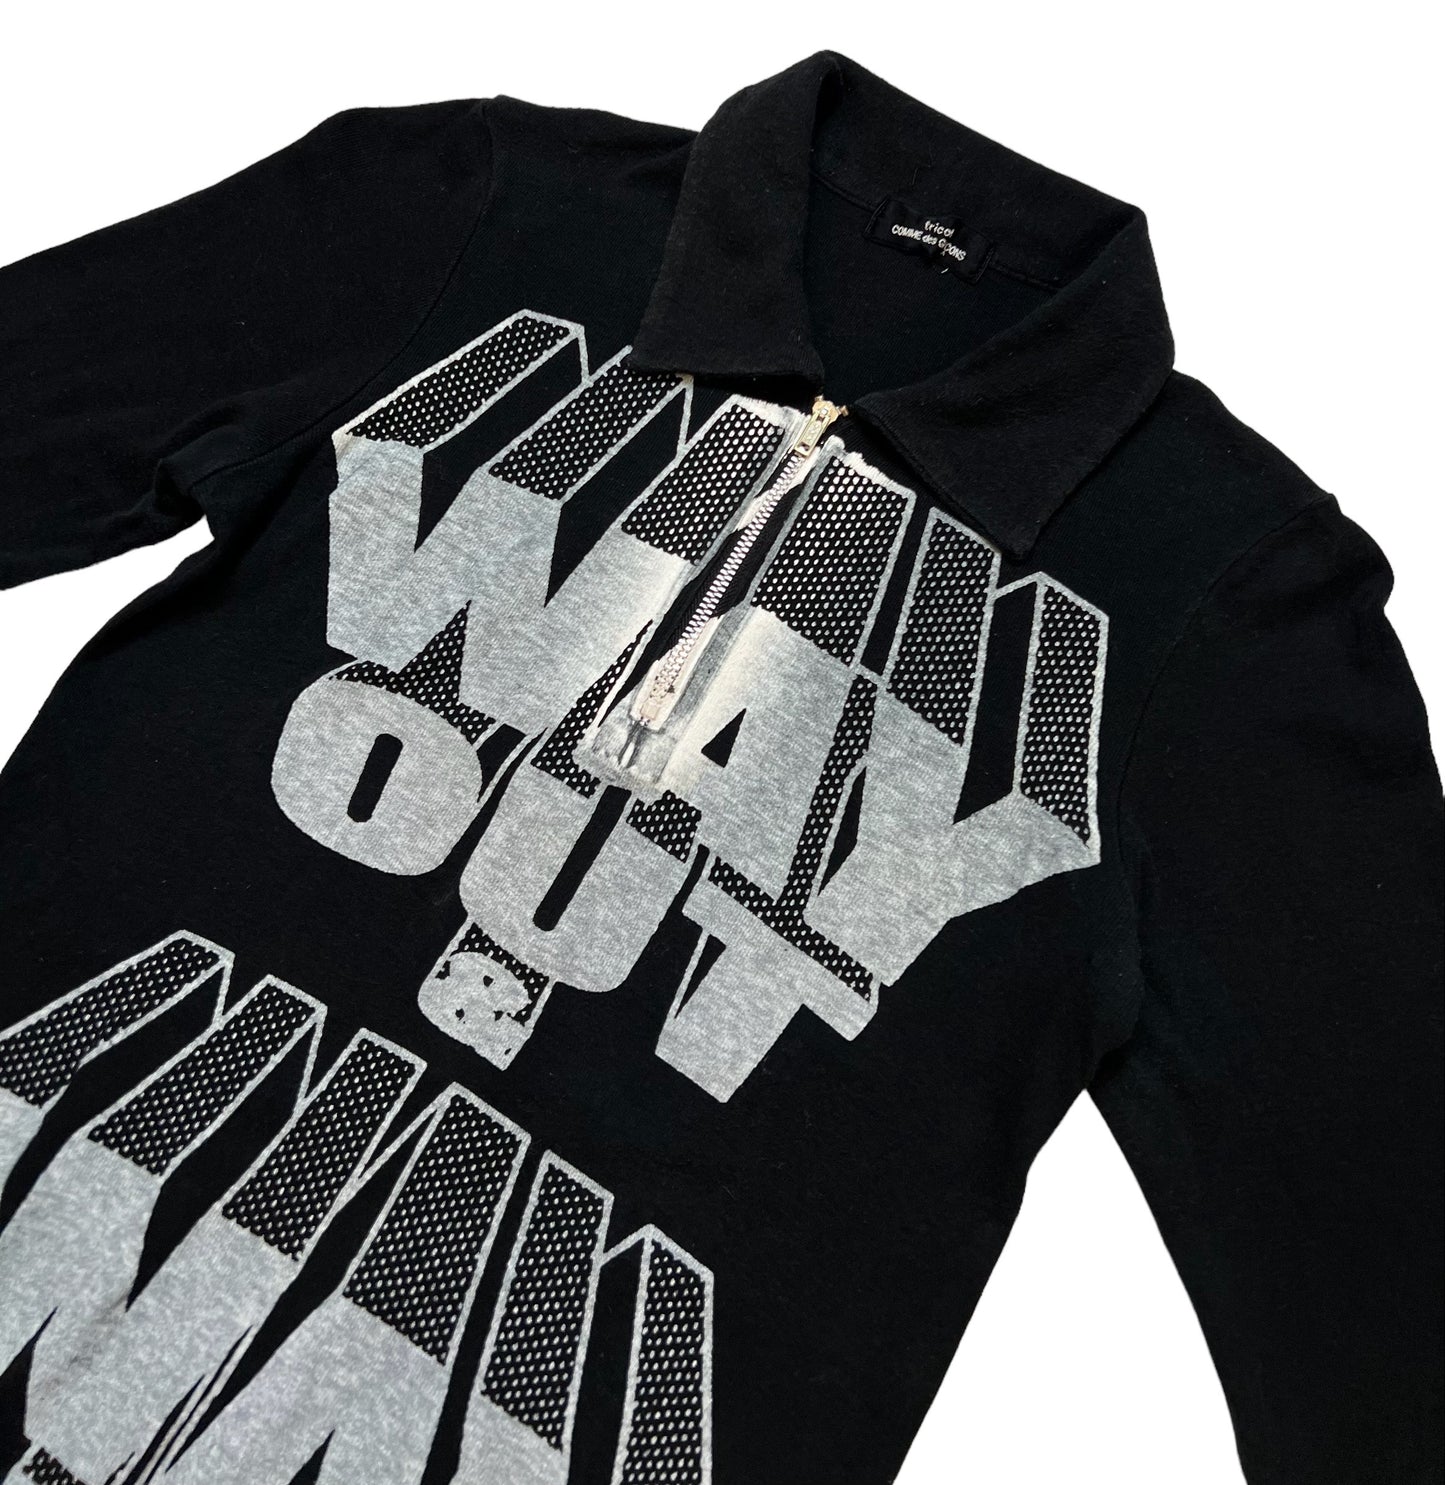 2004 Tricot COMME des GARÇONS "Way Out & Way In" knit shirt